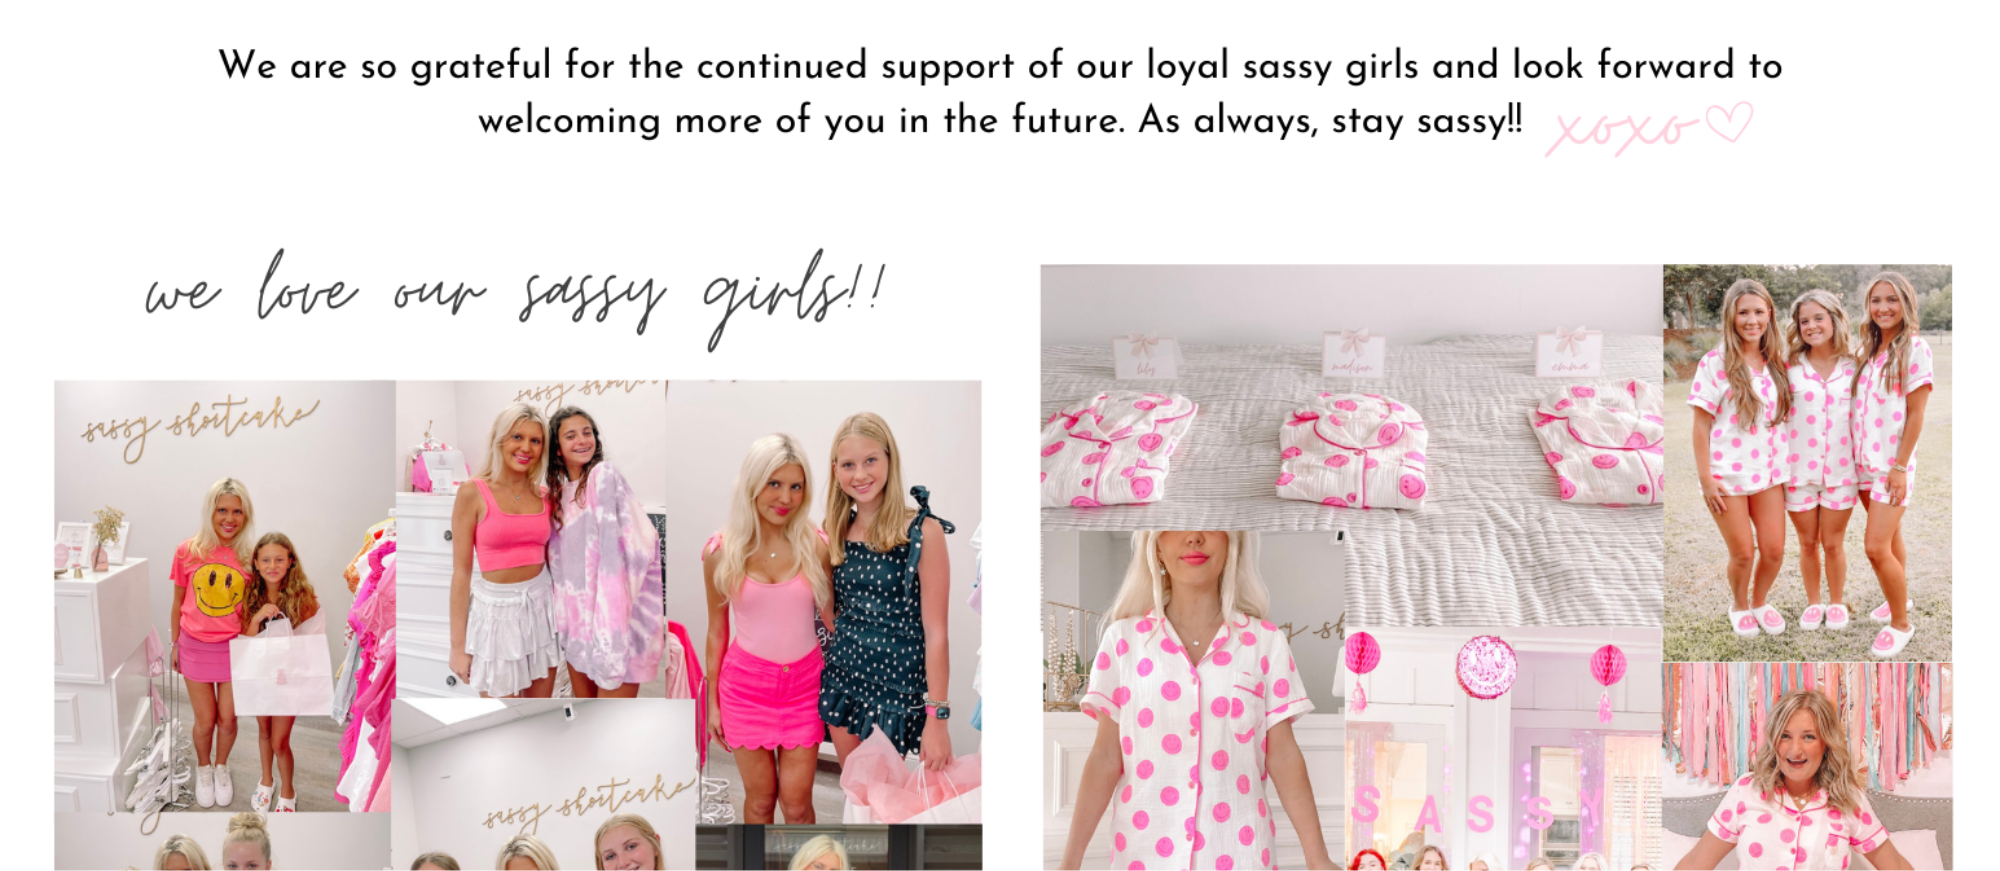 We are so grateful for the continued support of our loyal sassy girls and look forward to welcoming more of you in the future. As always, stay sassy!!